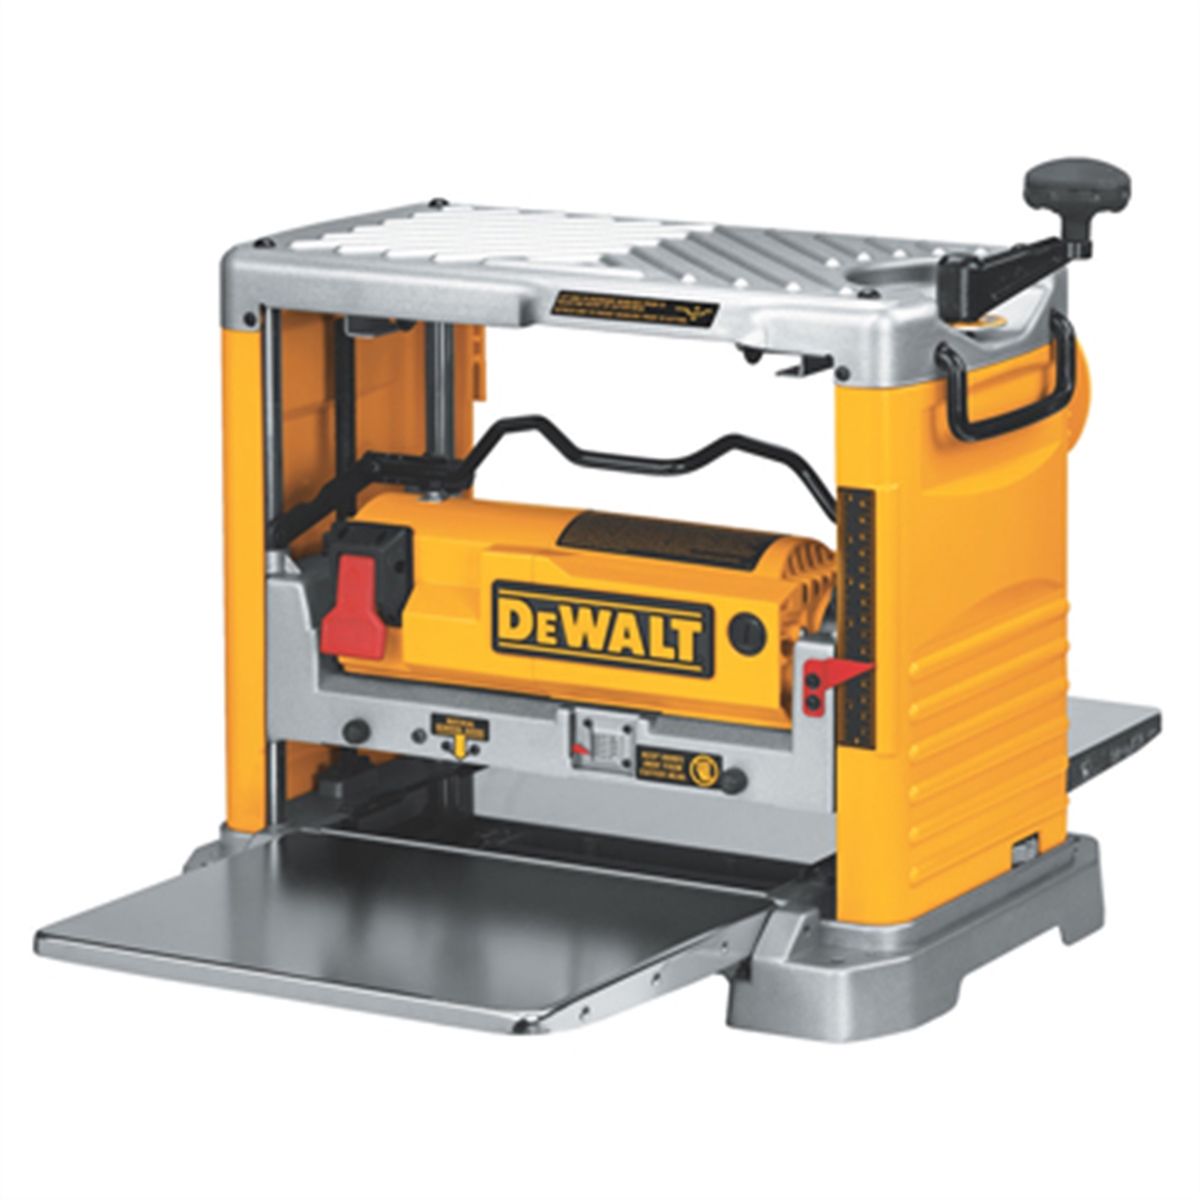 DeWALT DW734 12-1/2 In Thickness Planer with Three Knife Cutter-